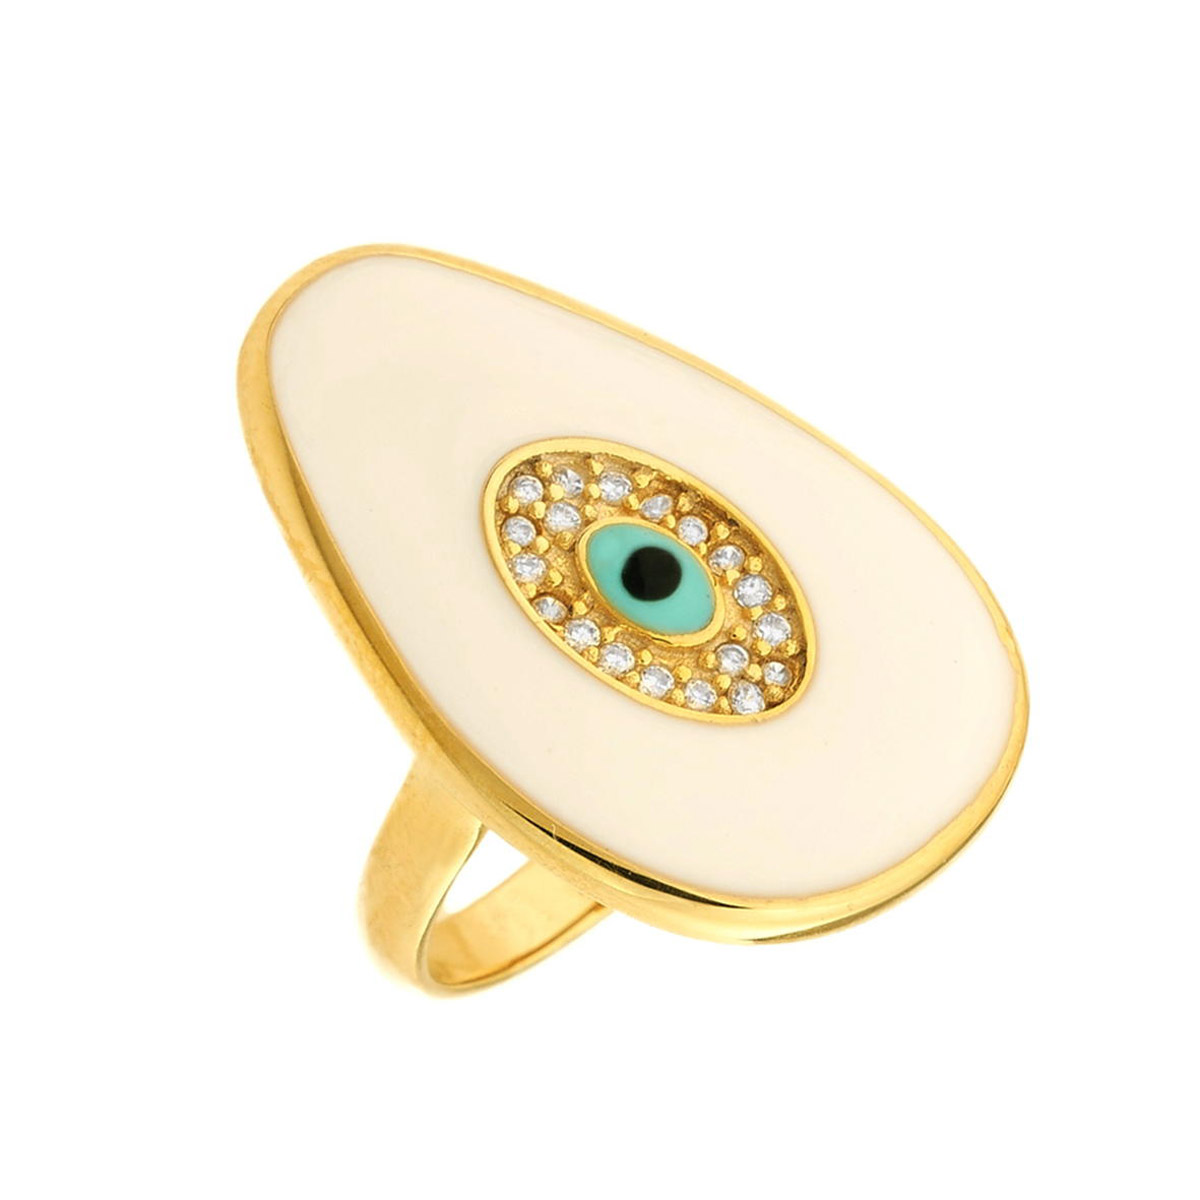 GREGIO Evil Eye Ring with White Enamel – Gold Plated Silver 925